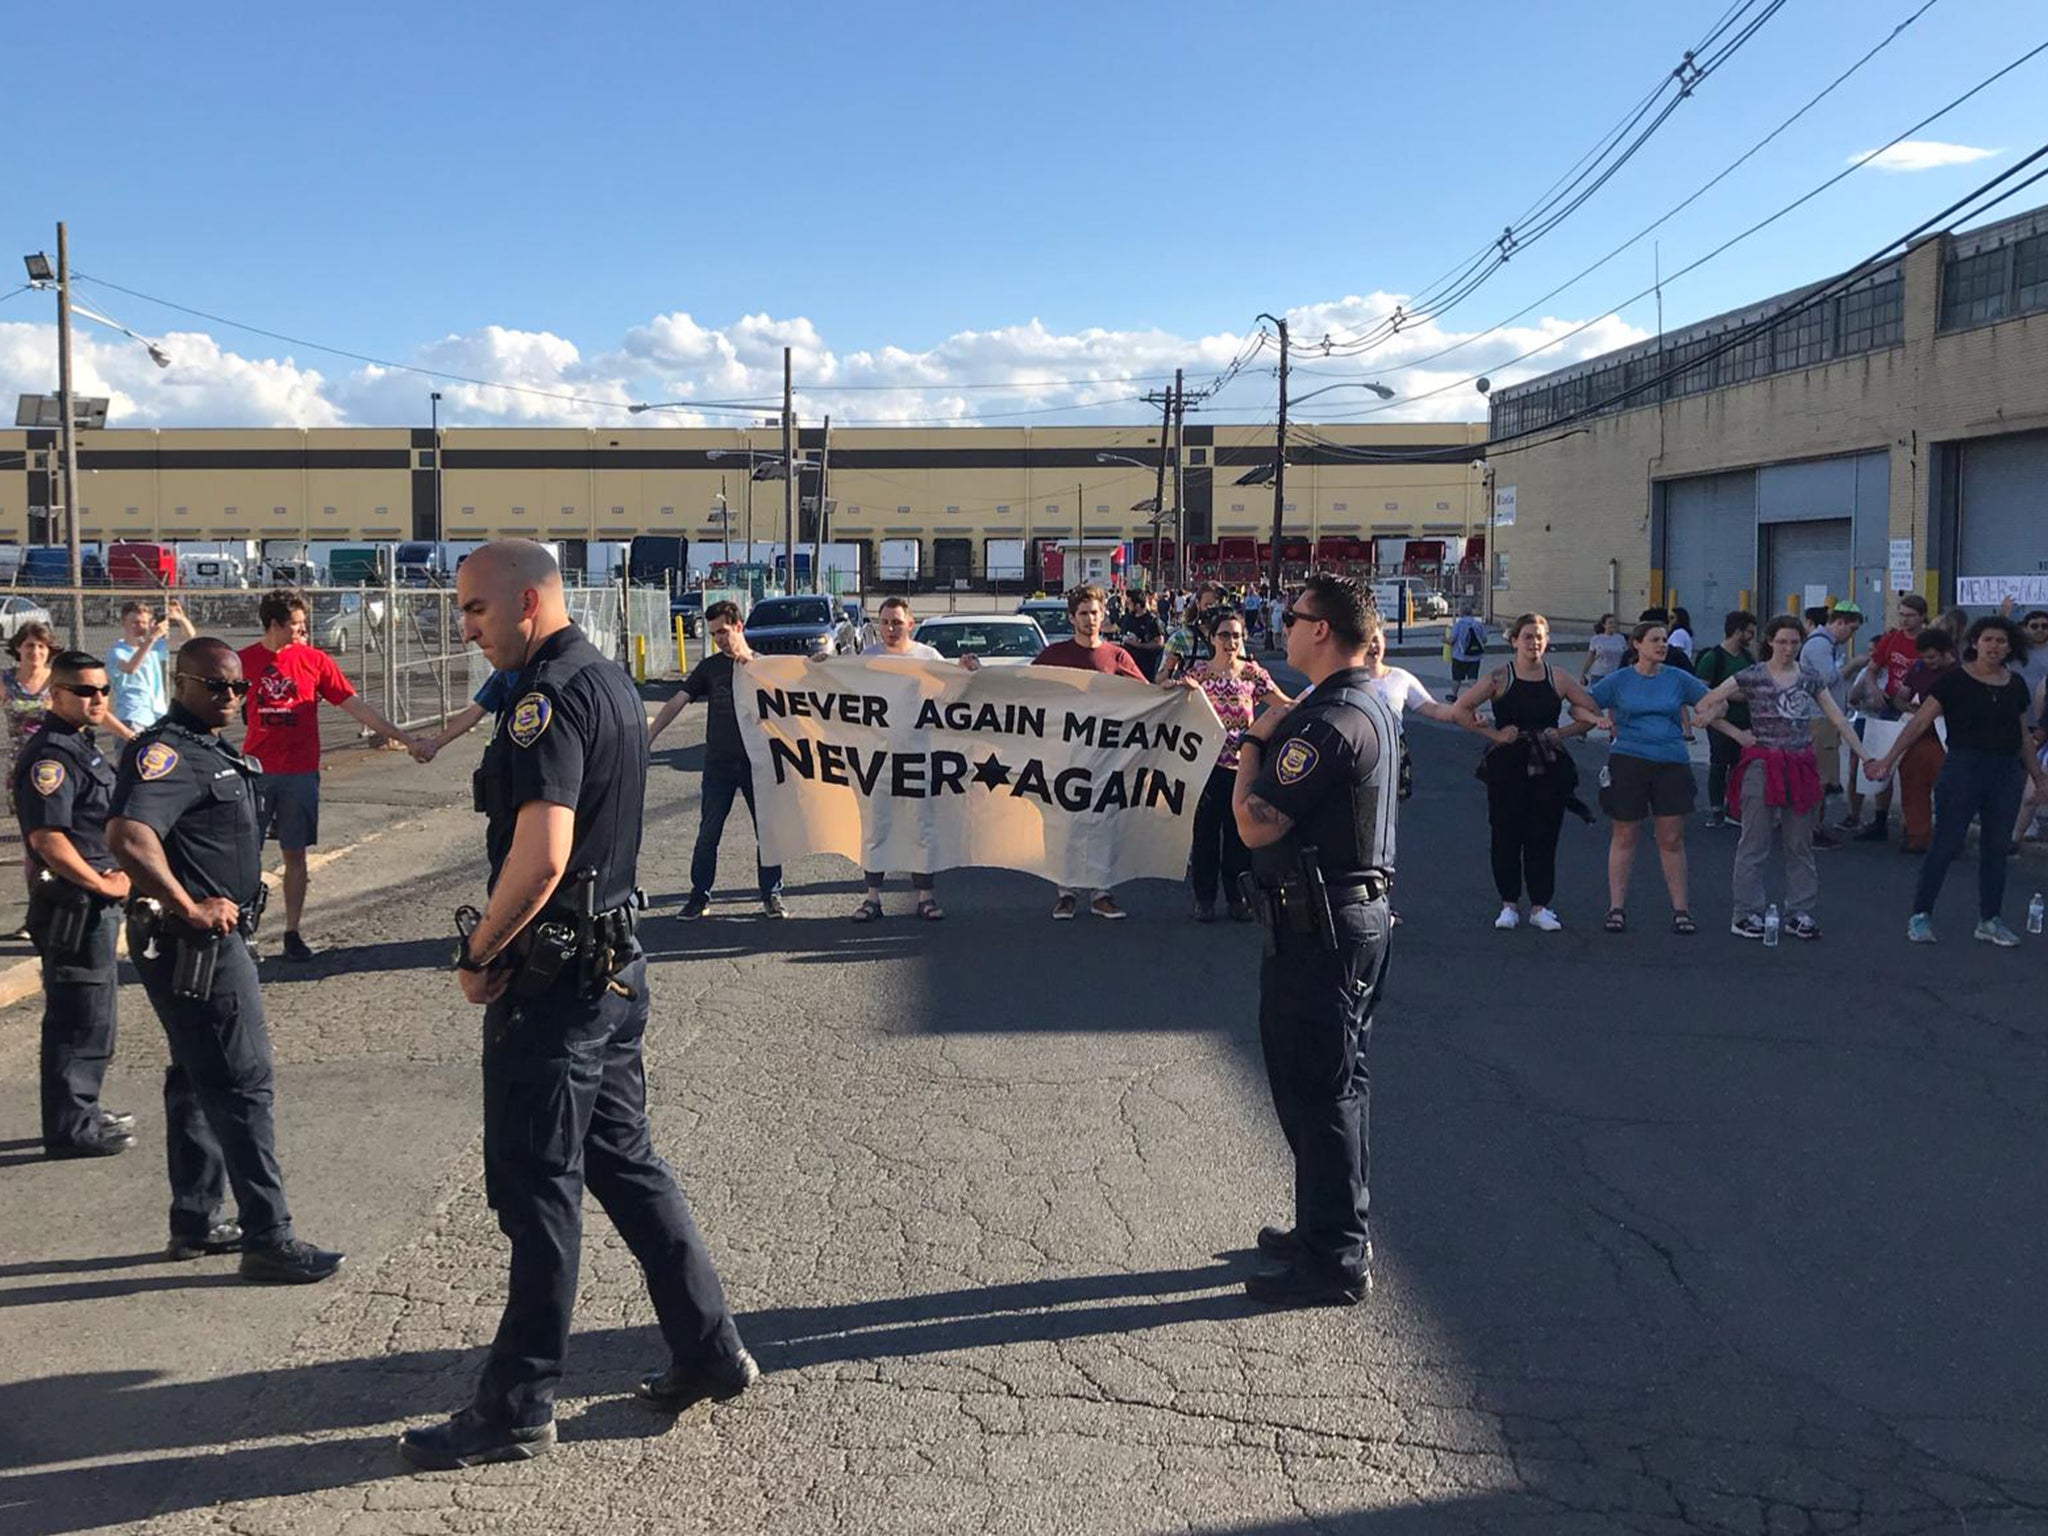 Hundreds of people blocked the entrance to the Elizabeth Detention Centre in New Jersey